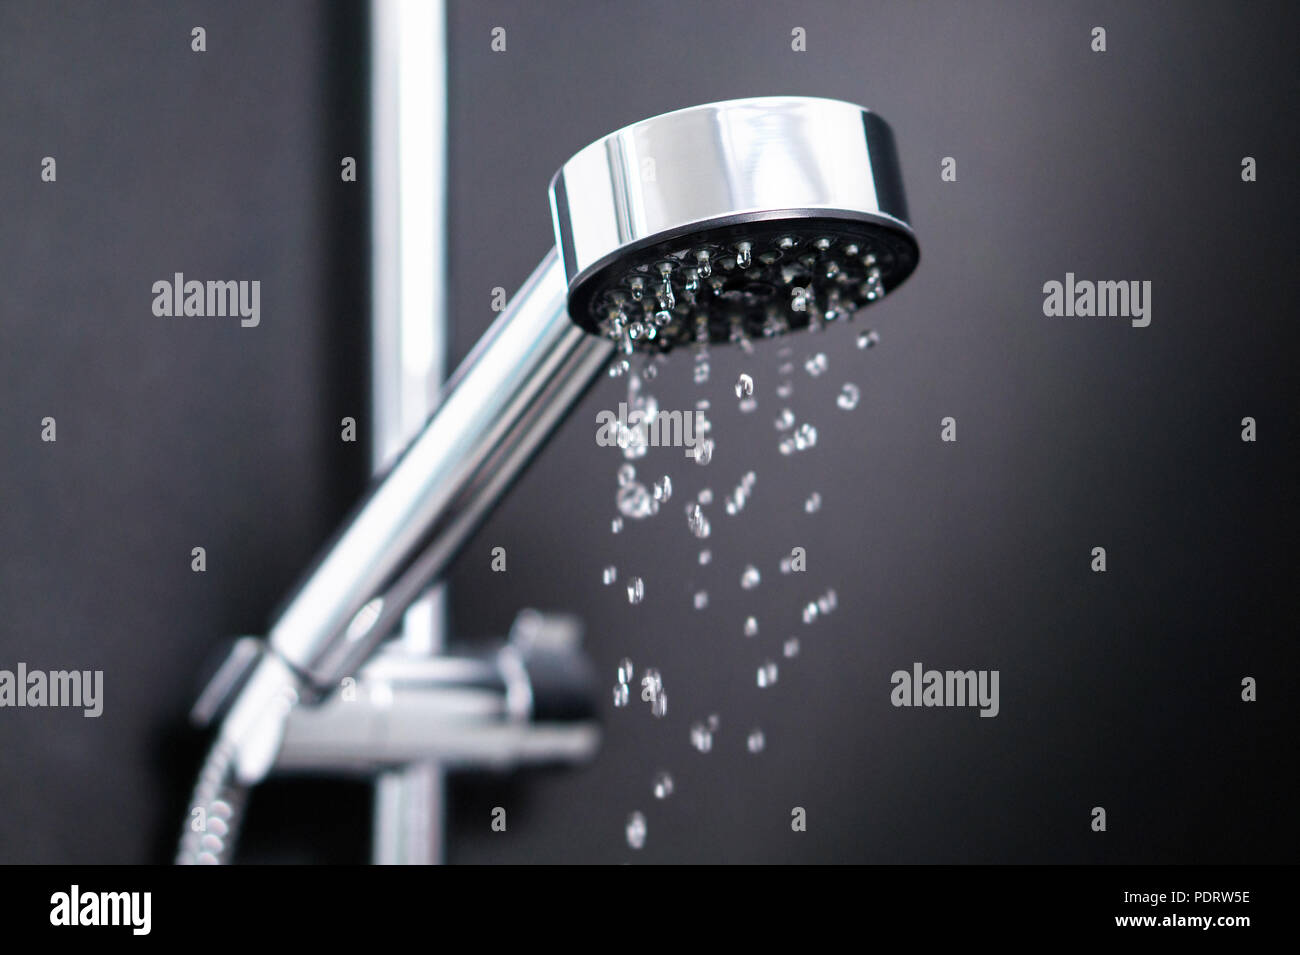 Turning off or on running water in shower. Last or first drops splash from faucet. Water consumption, bill, saving, shortage and ecology concept. Stock Photo